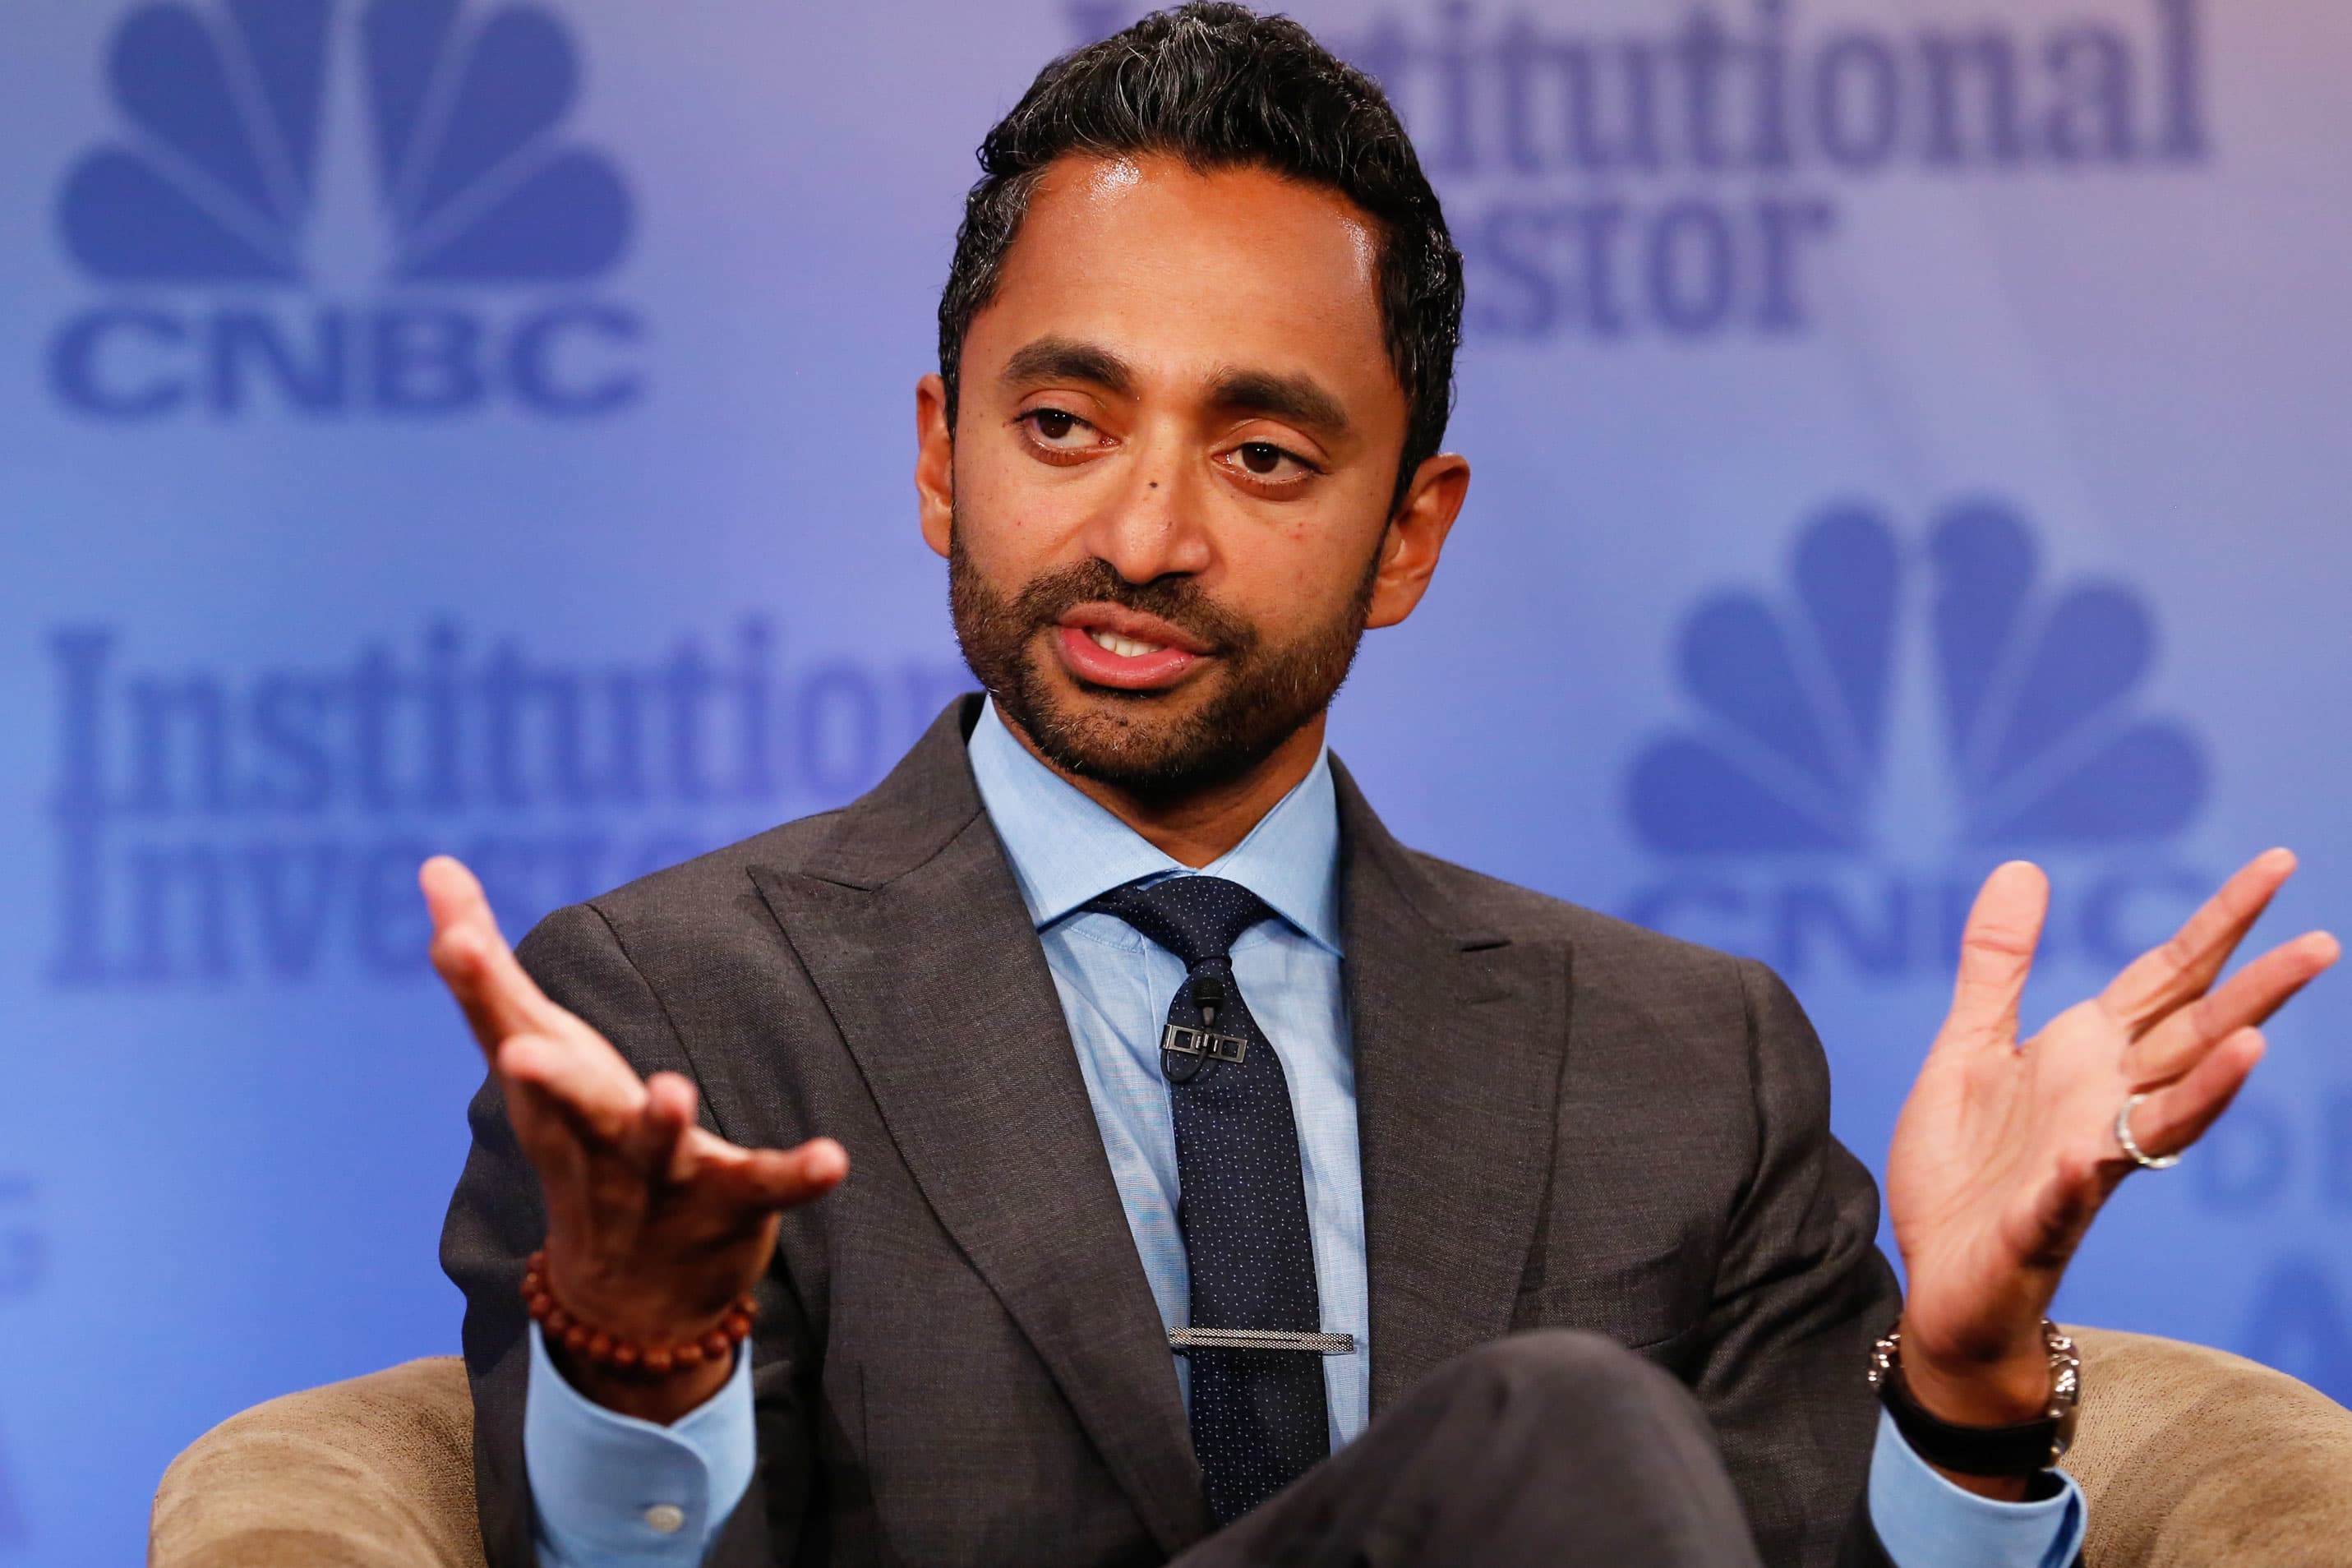 Warren Buffett is 'completely wrong and outdated' on bitcoin, Chamath Palihapitiya says - CNBC